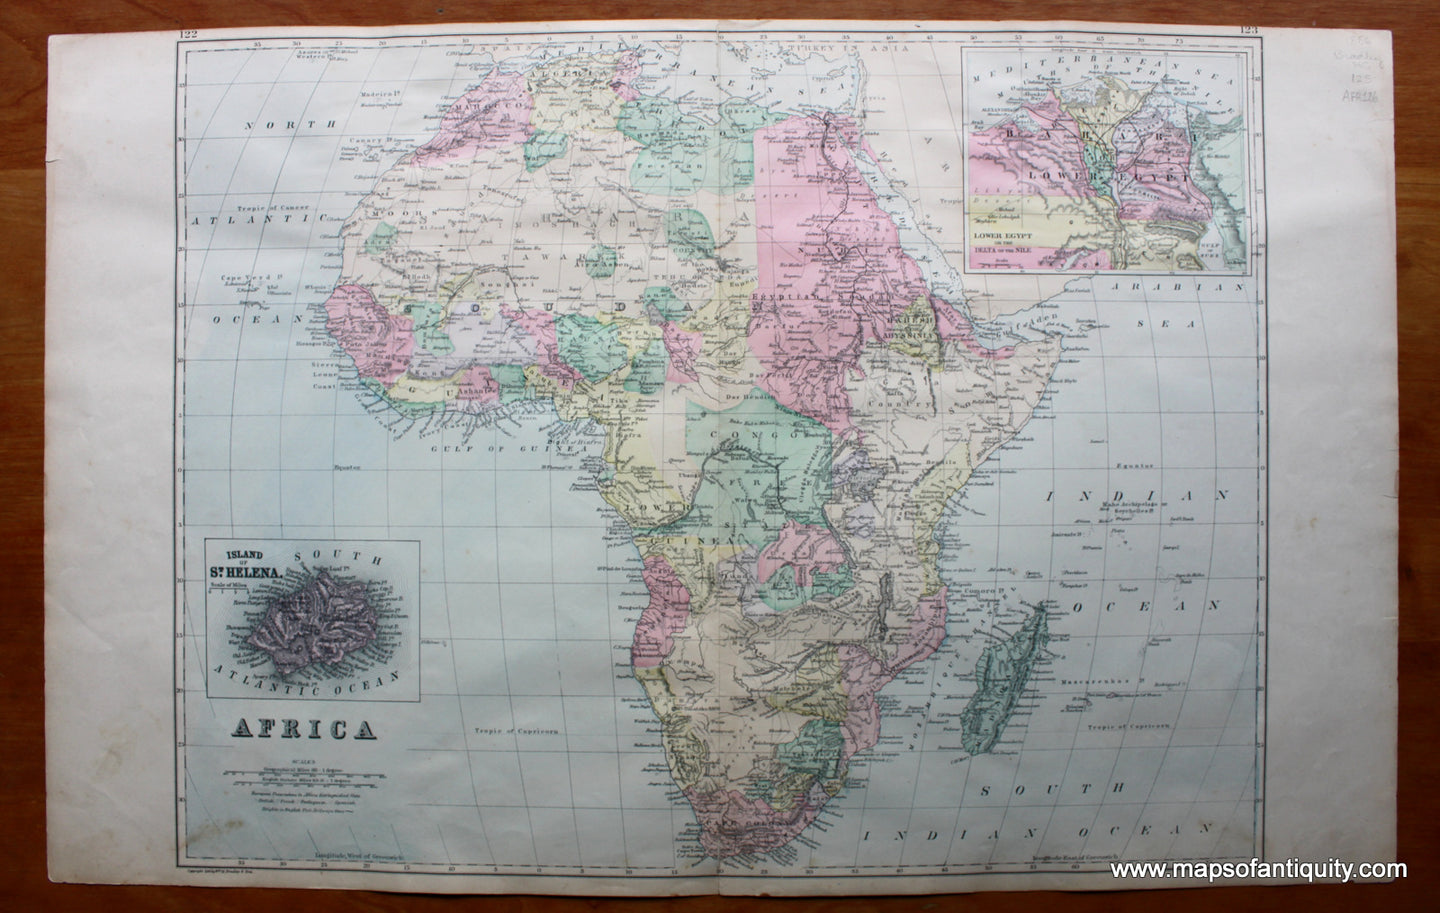 Antique-Hand-Colored-Map-Africa-Africa-Africa-General-1886-Bradley-Maps-Of-Antiquity